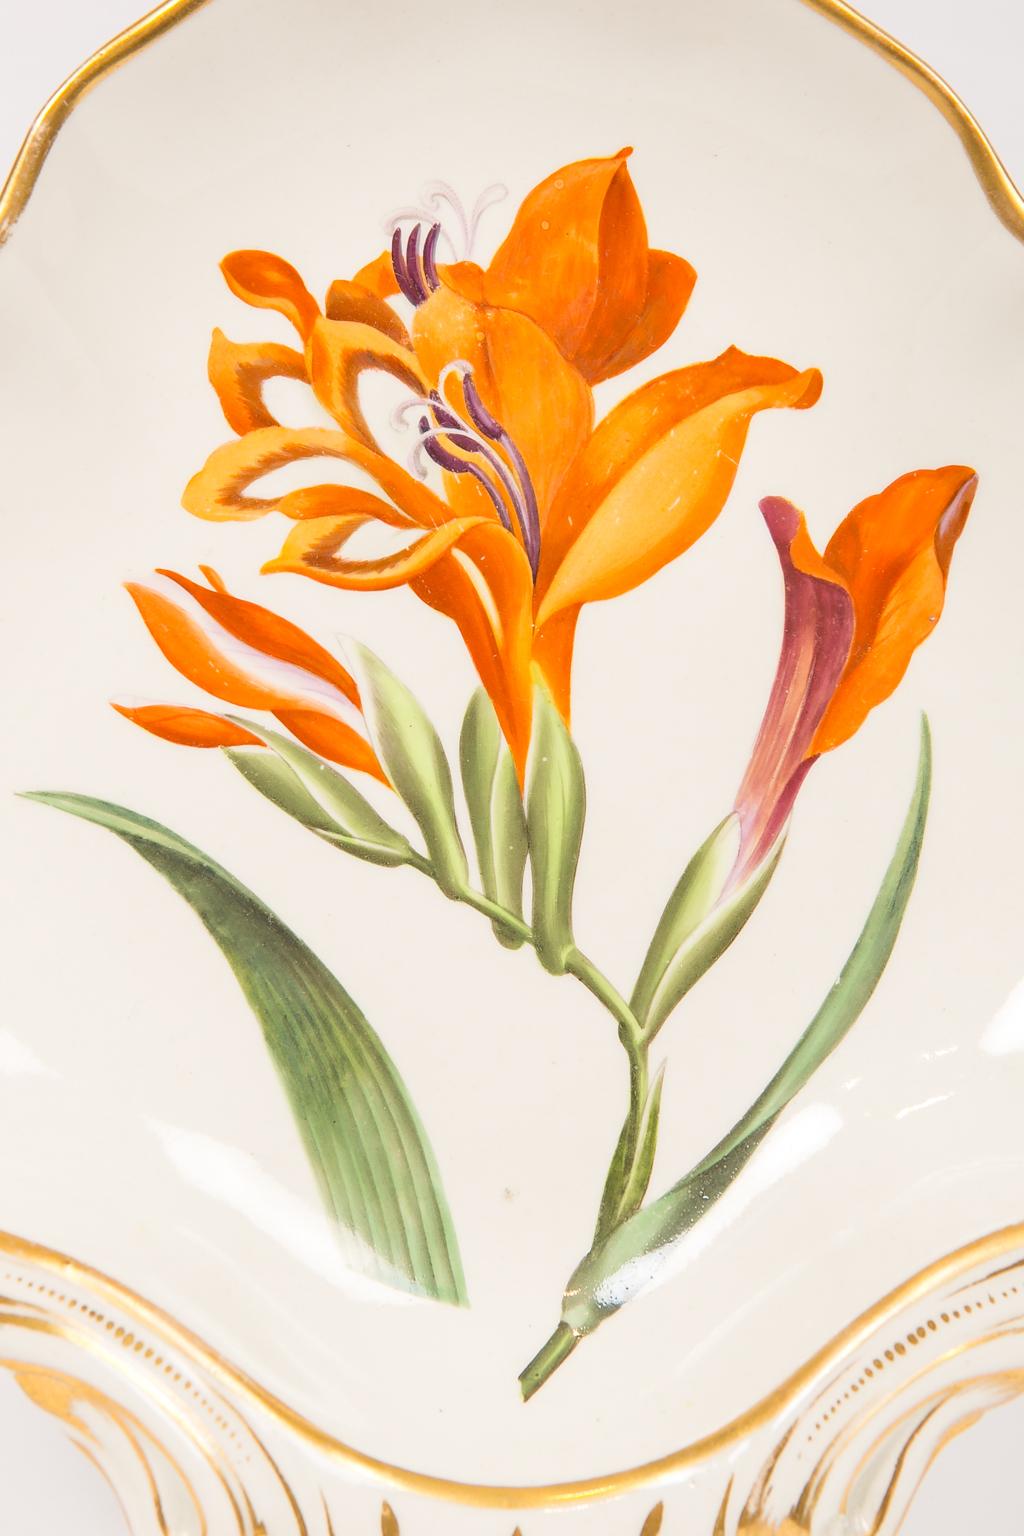 A Derby porcelain dish with a named botanical flower: a single beautiful gladiola painted in the late 18th century by the renowned artist Quaker Pegg. The combination of the various shades of orange with the touches of purple, and the subtle shades